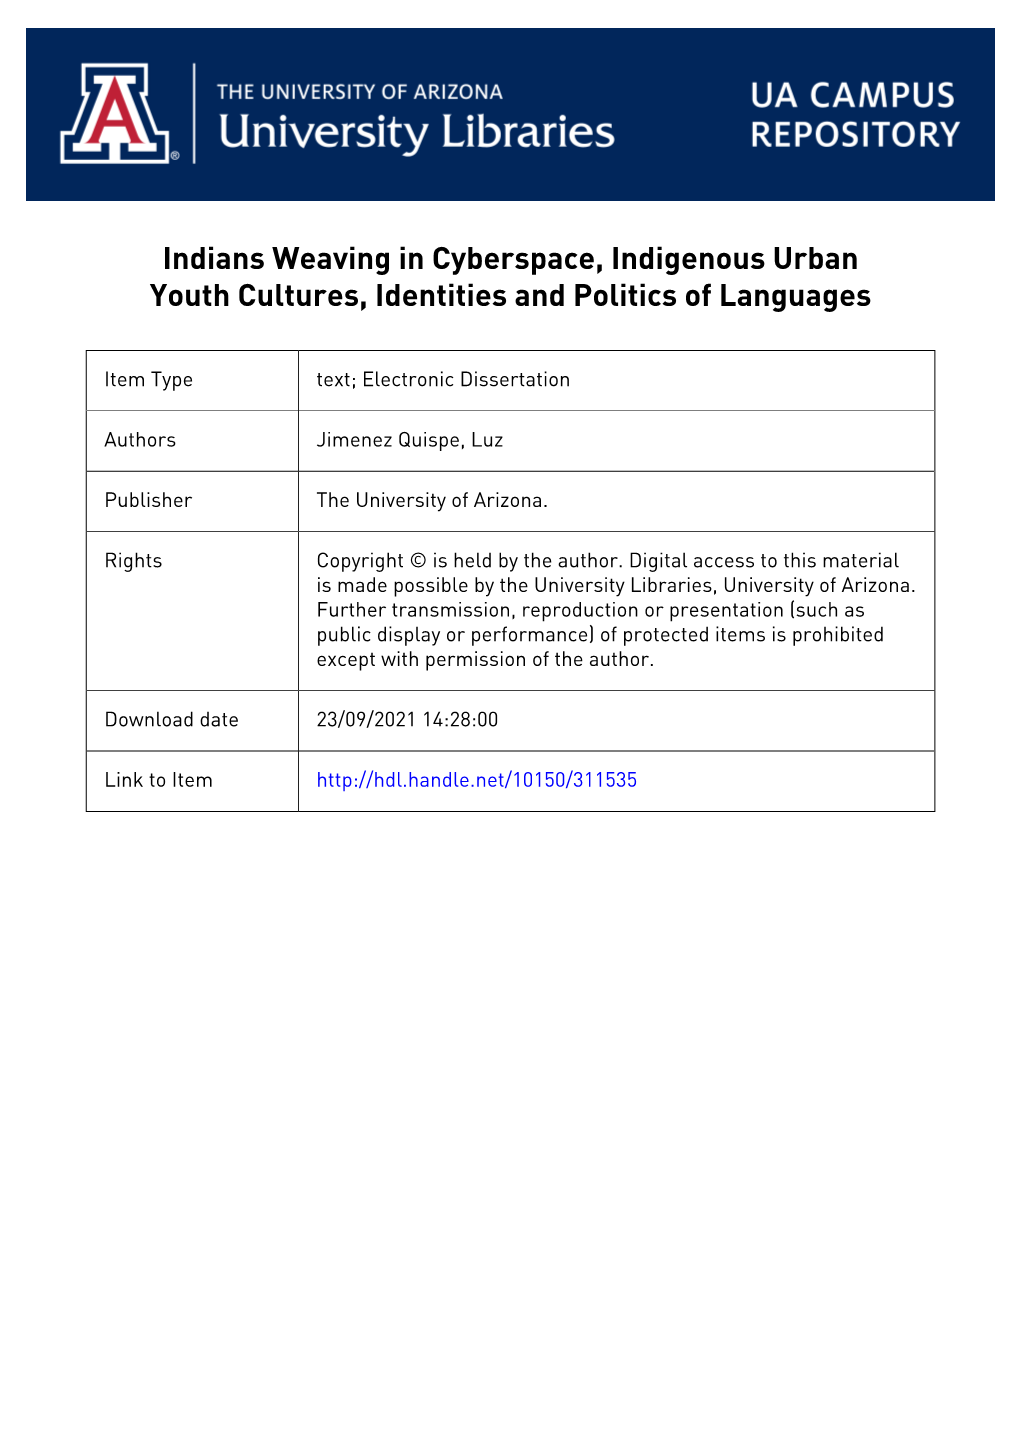 Indians Weaving in Cyberspace, Indigenous Urban Youth Cultures, Identities and Politics of Languages